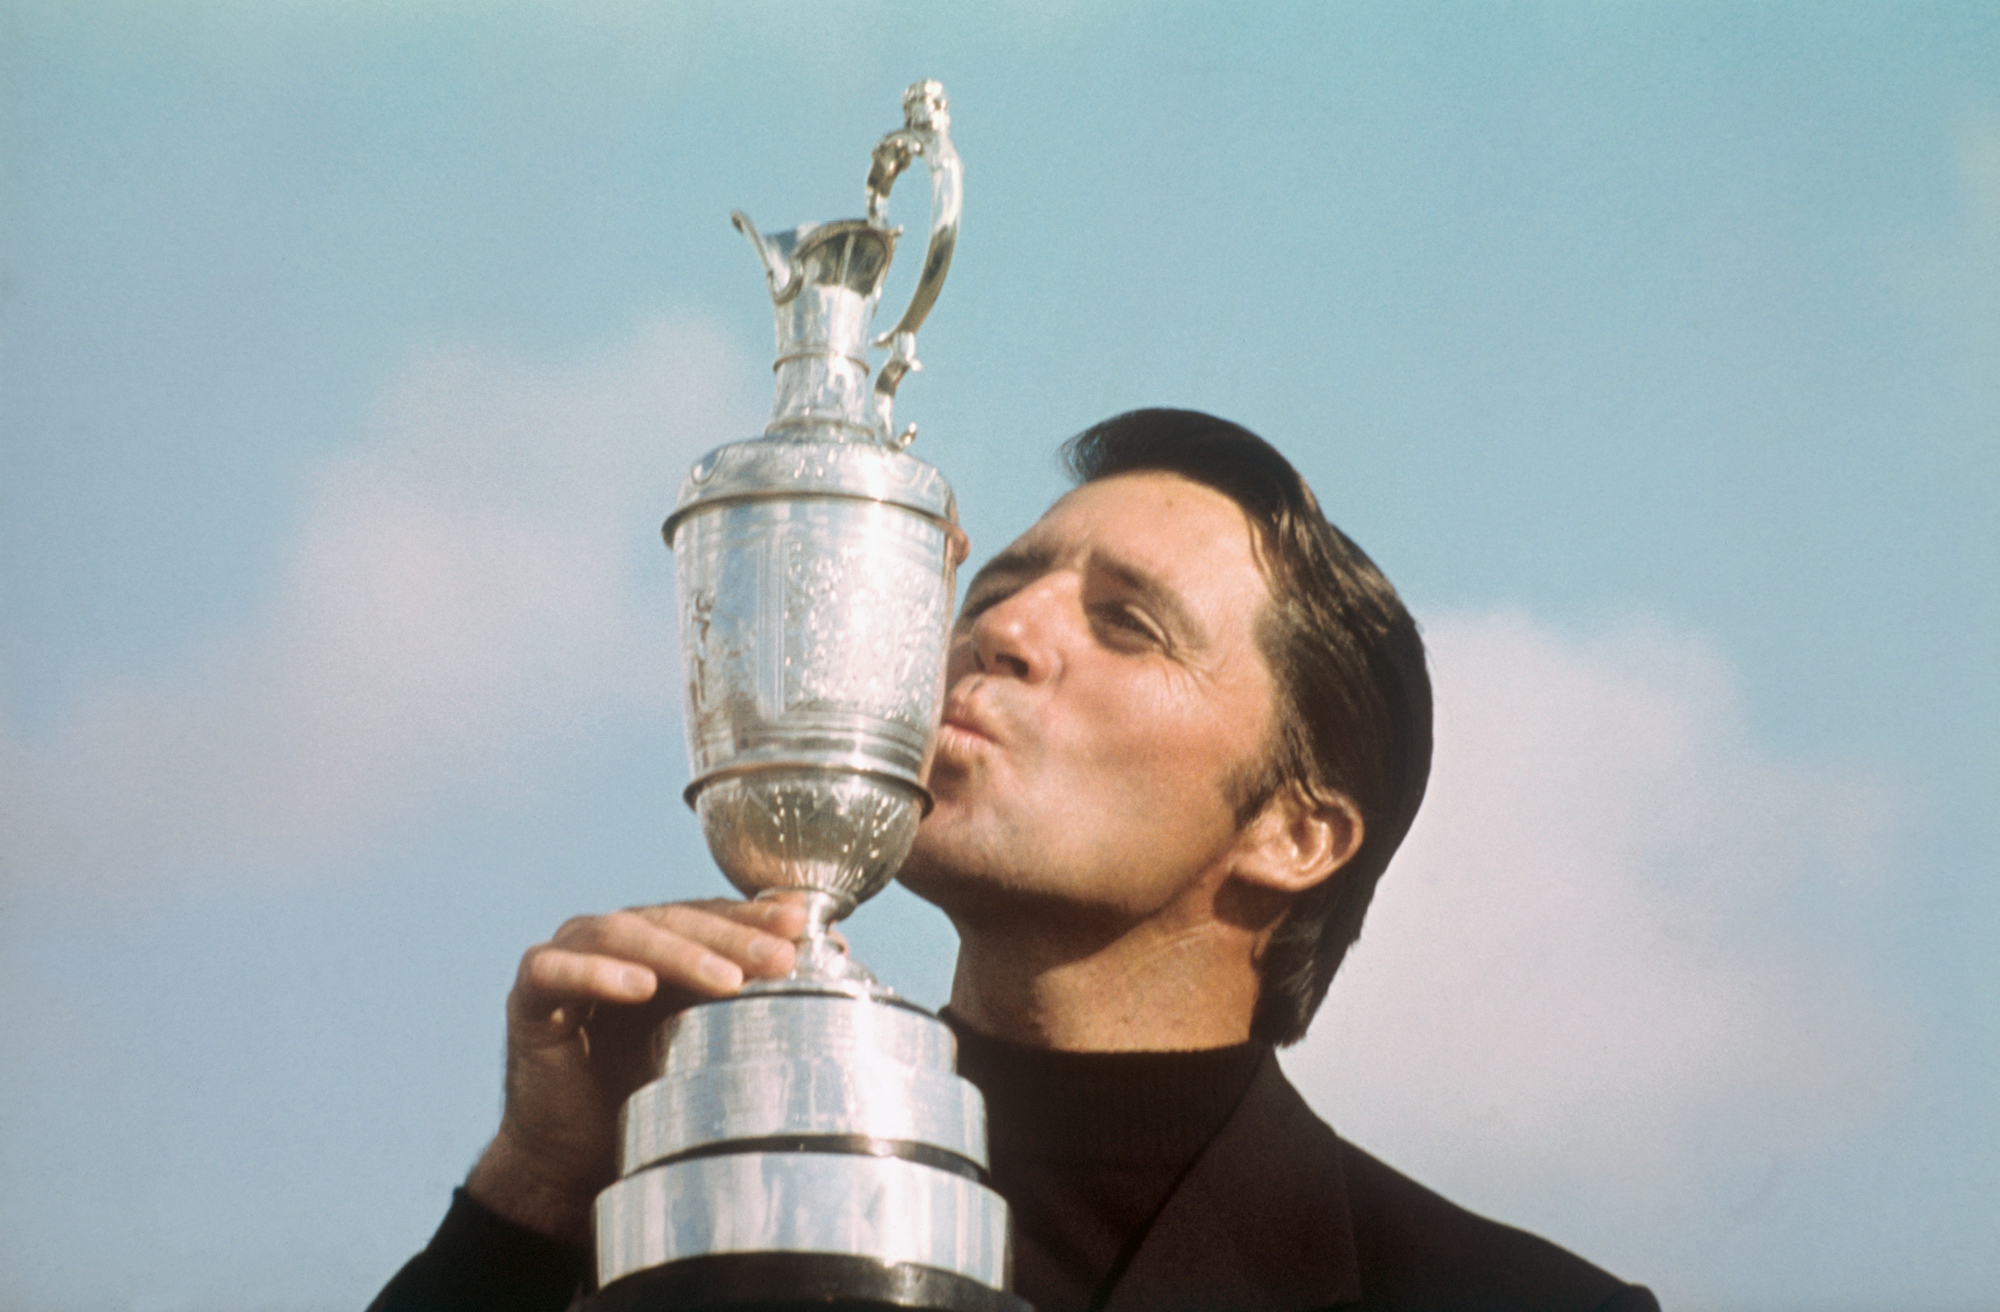 Player kissing his British Open Championship trophy in July 1974